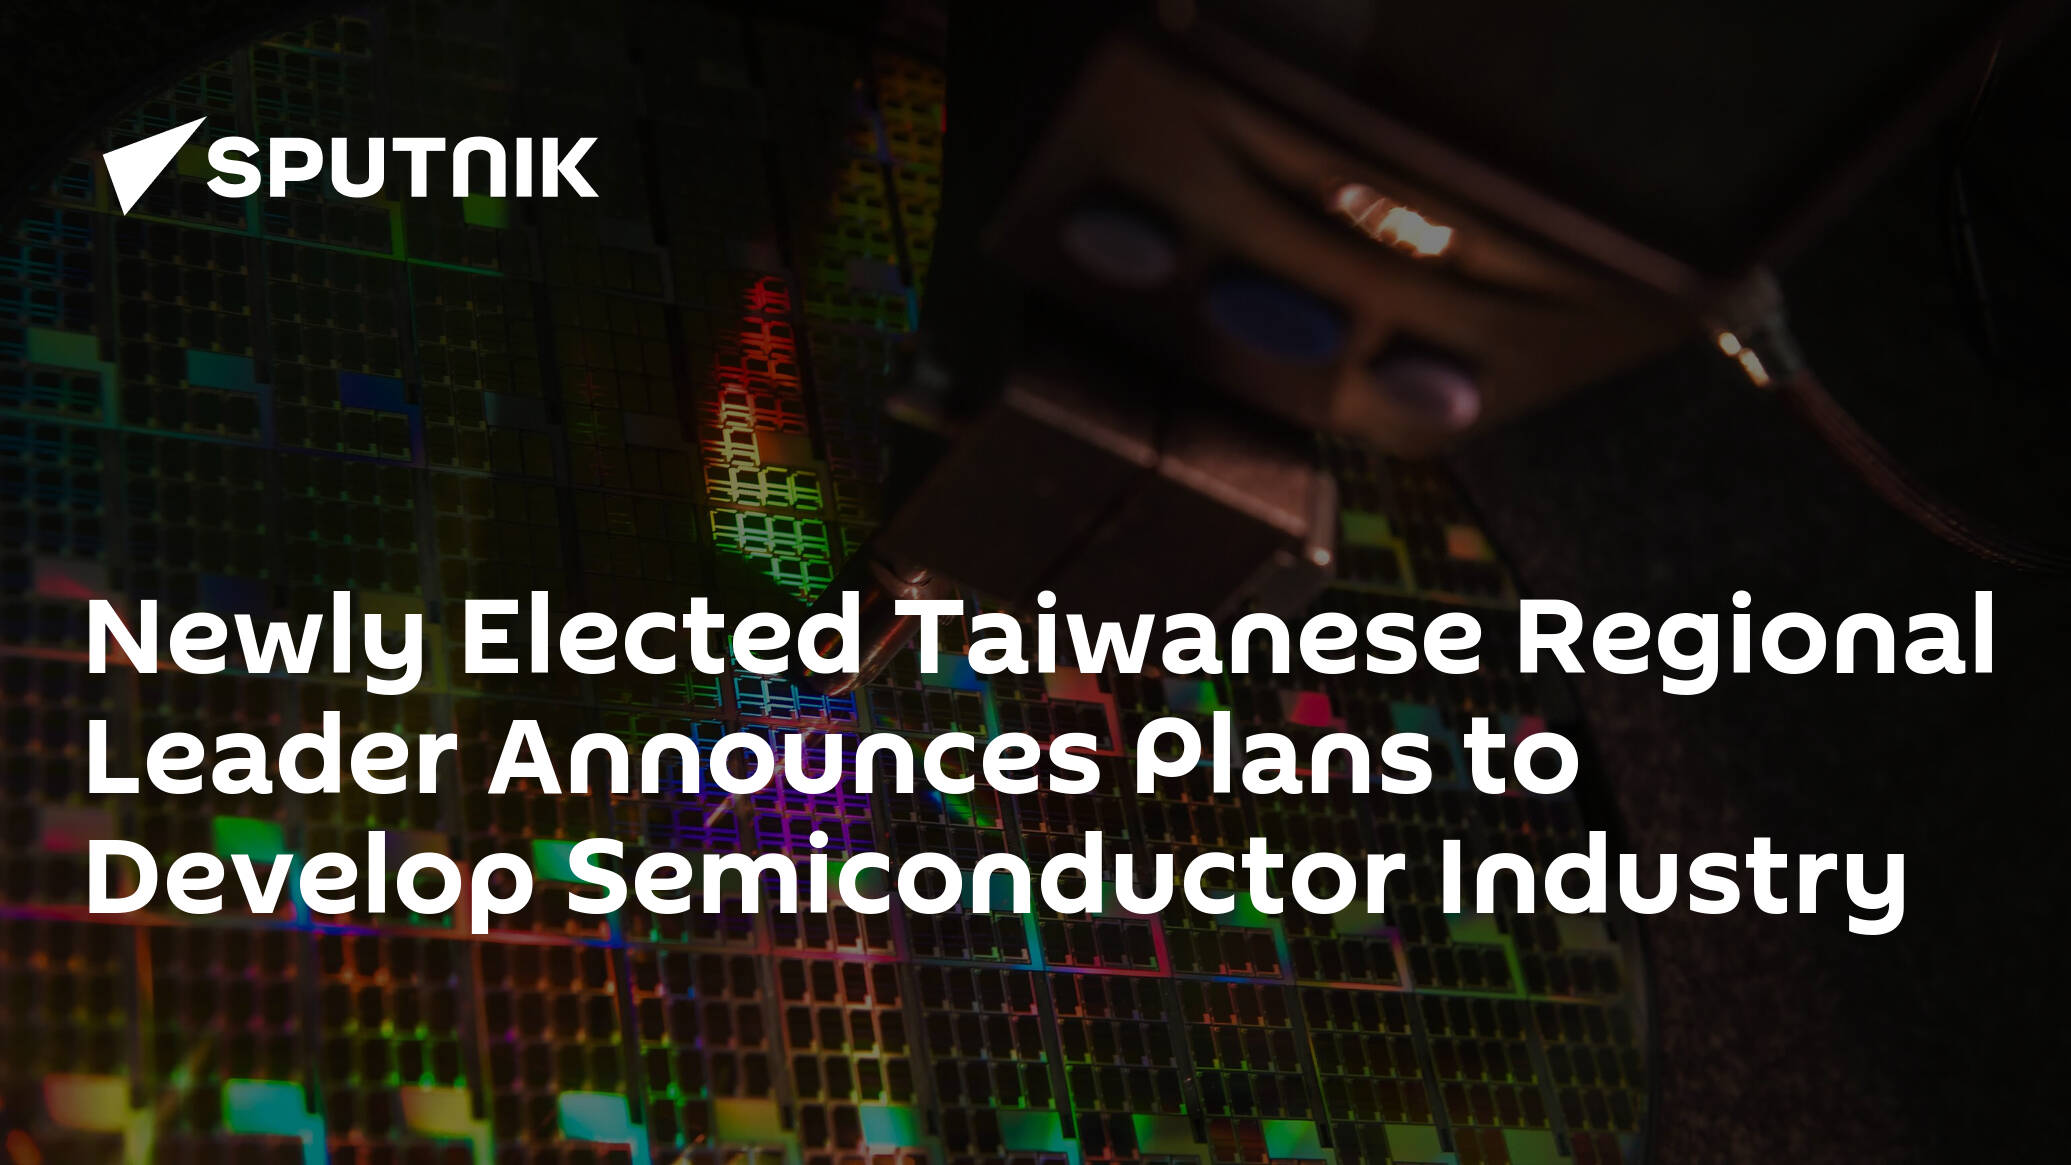 Newly Elected Taiwanese Regional Leader Announces Plans to Develop Semiconductor Industry